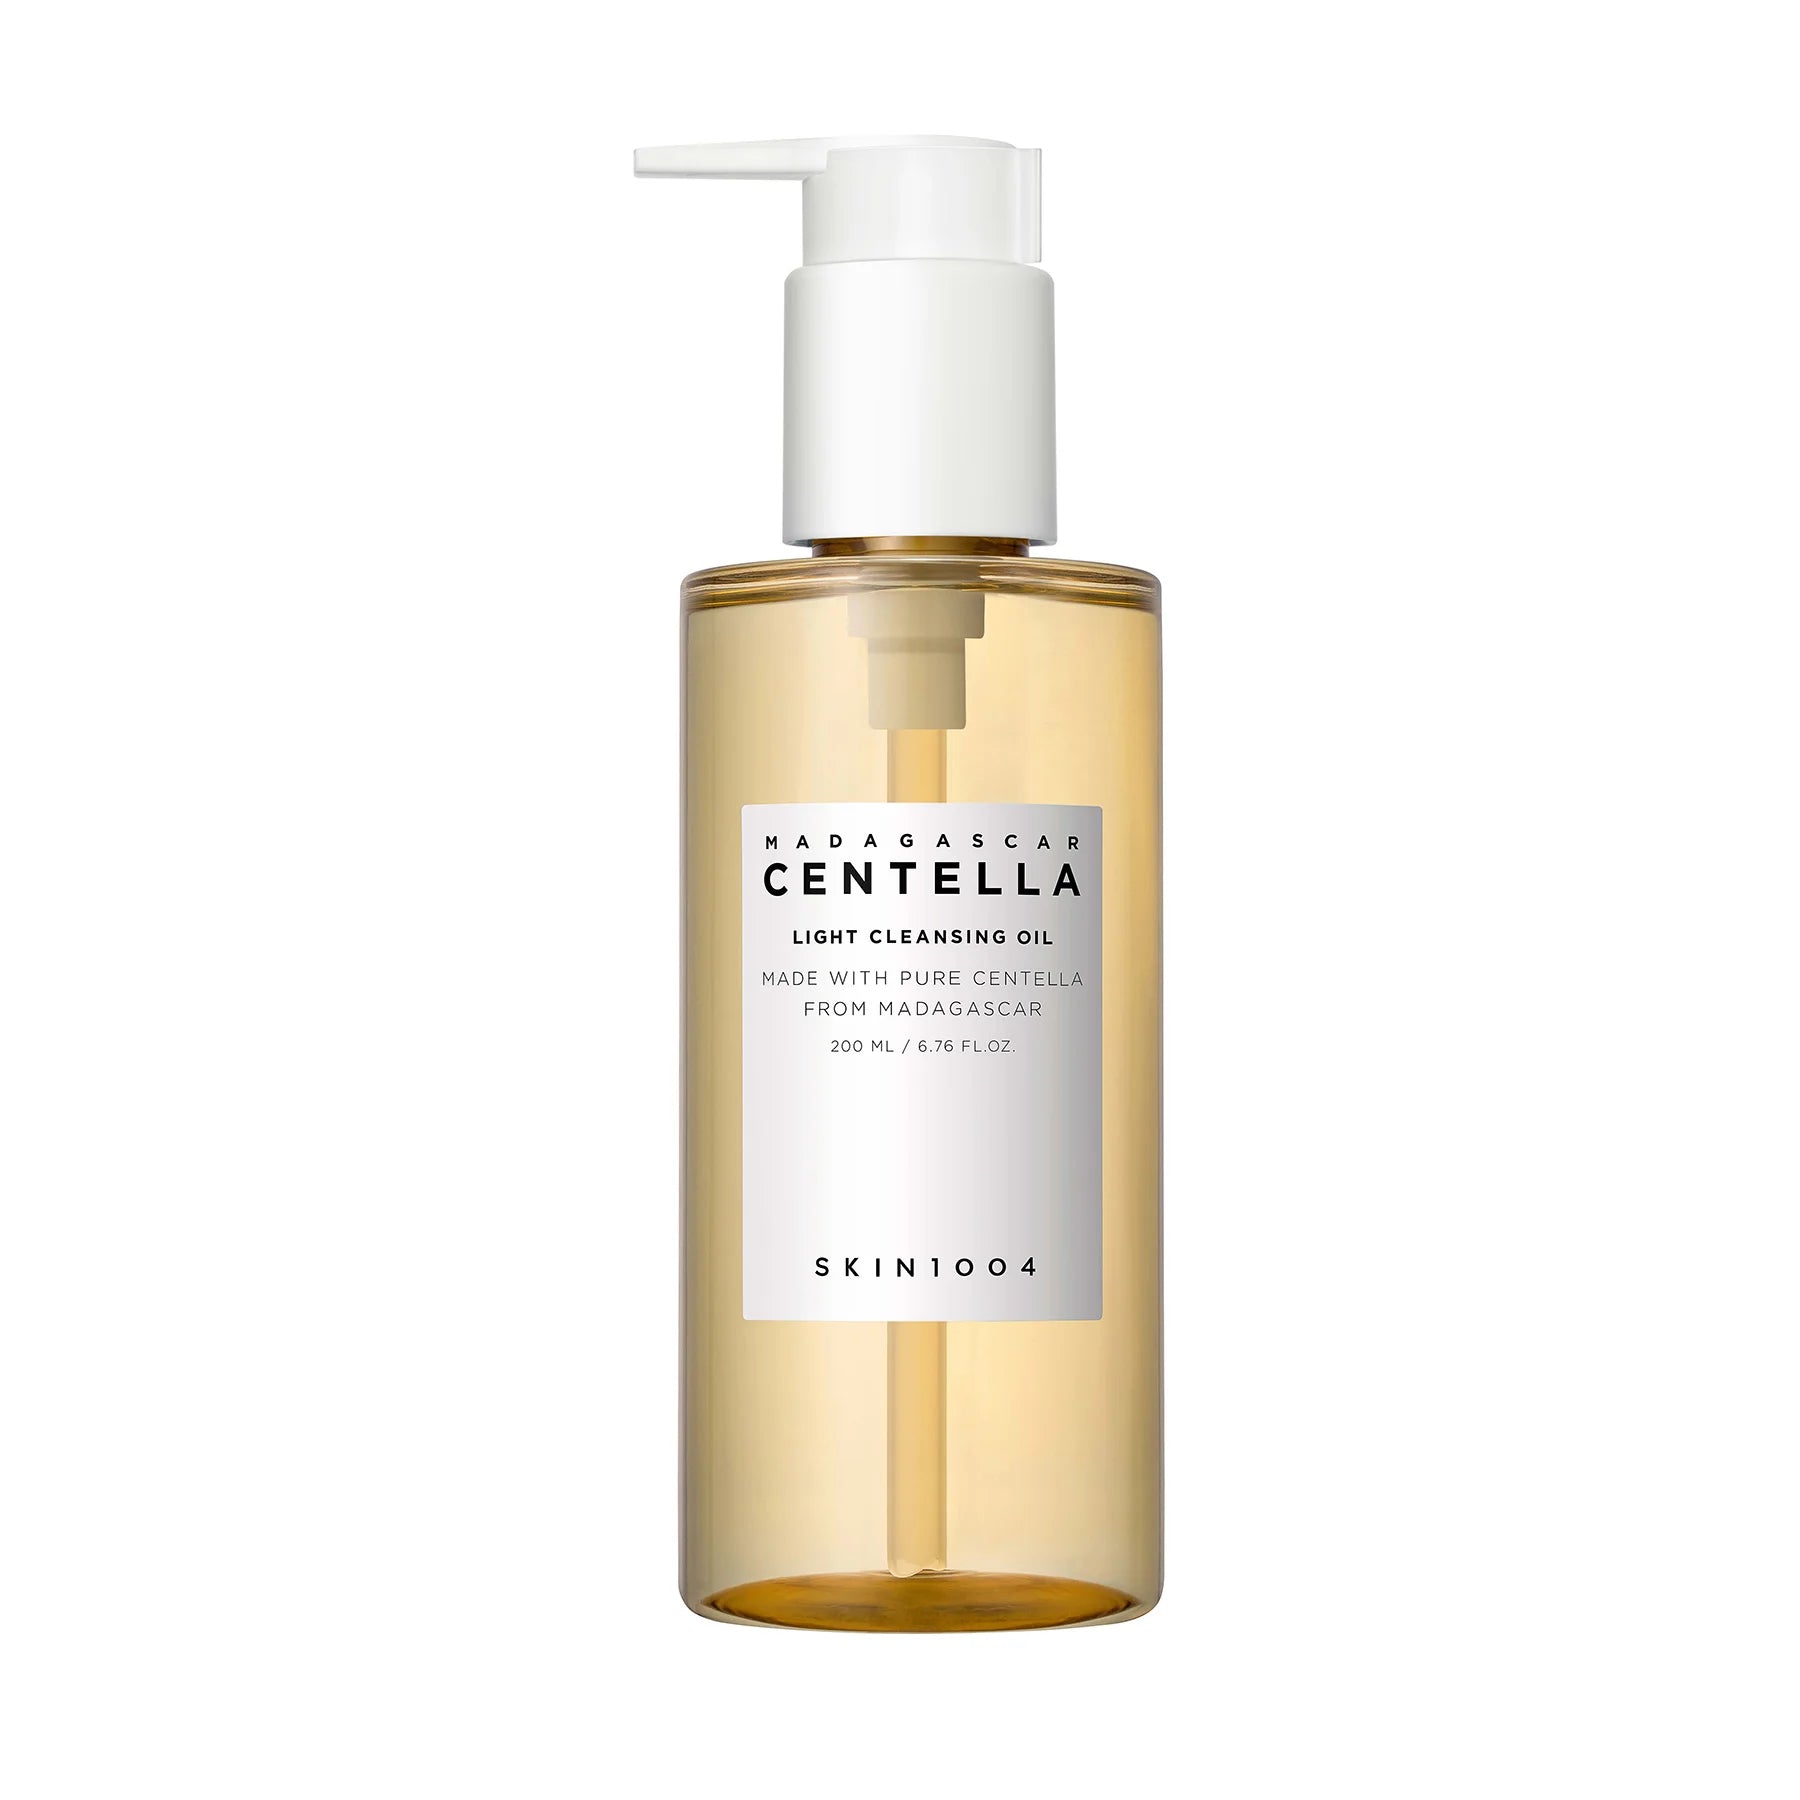 Skin1004 Madagascar Centella Light Cleansing Oil best soothing hydrating Korean makeup remover oil-based cleanser for double cleansing K Beauty World